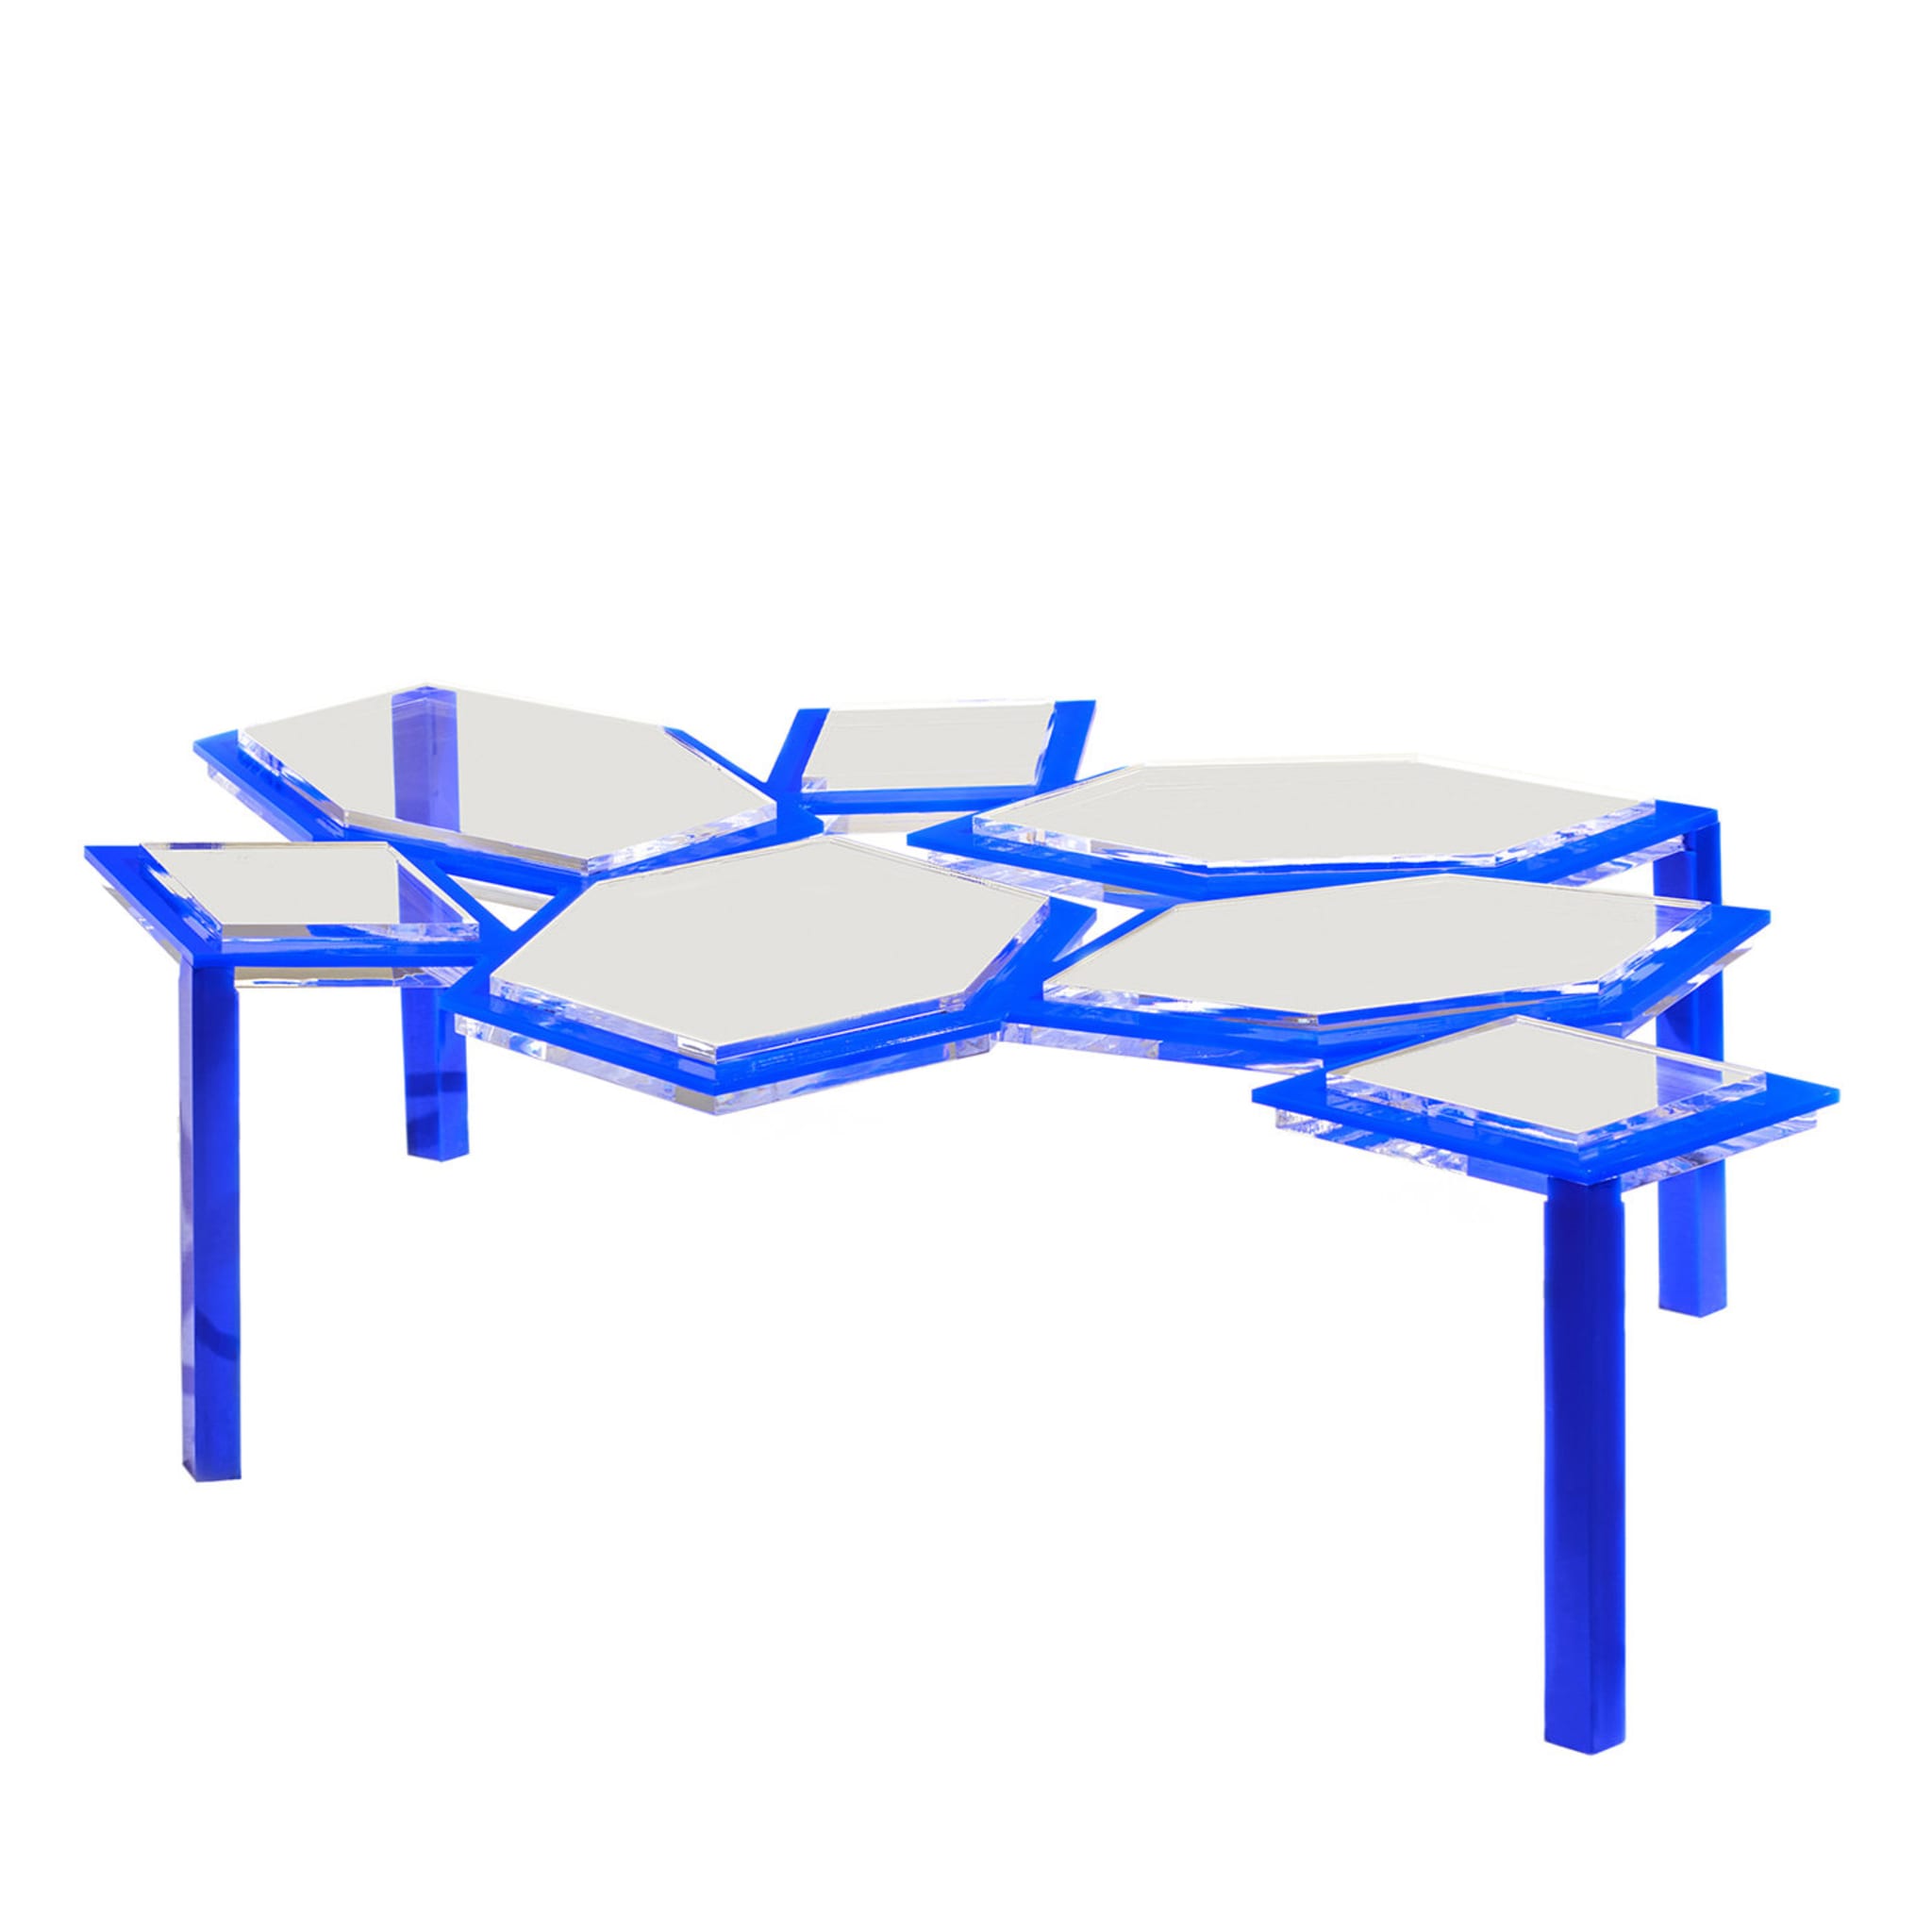 Penrose Large Blue Coffee Table #2 - Main view